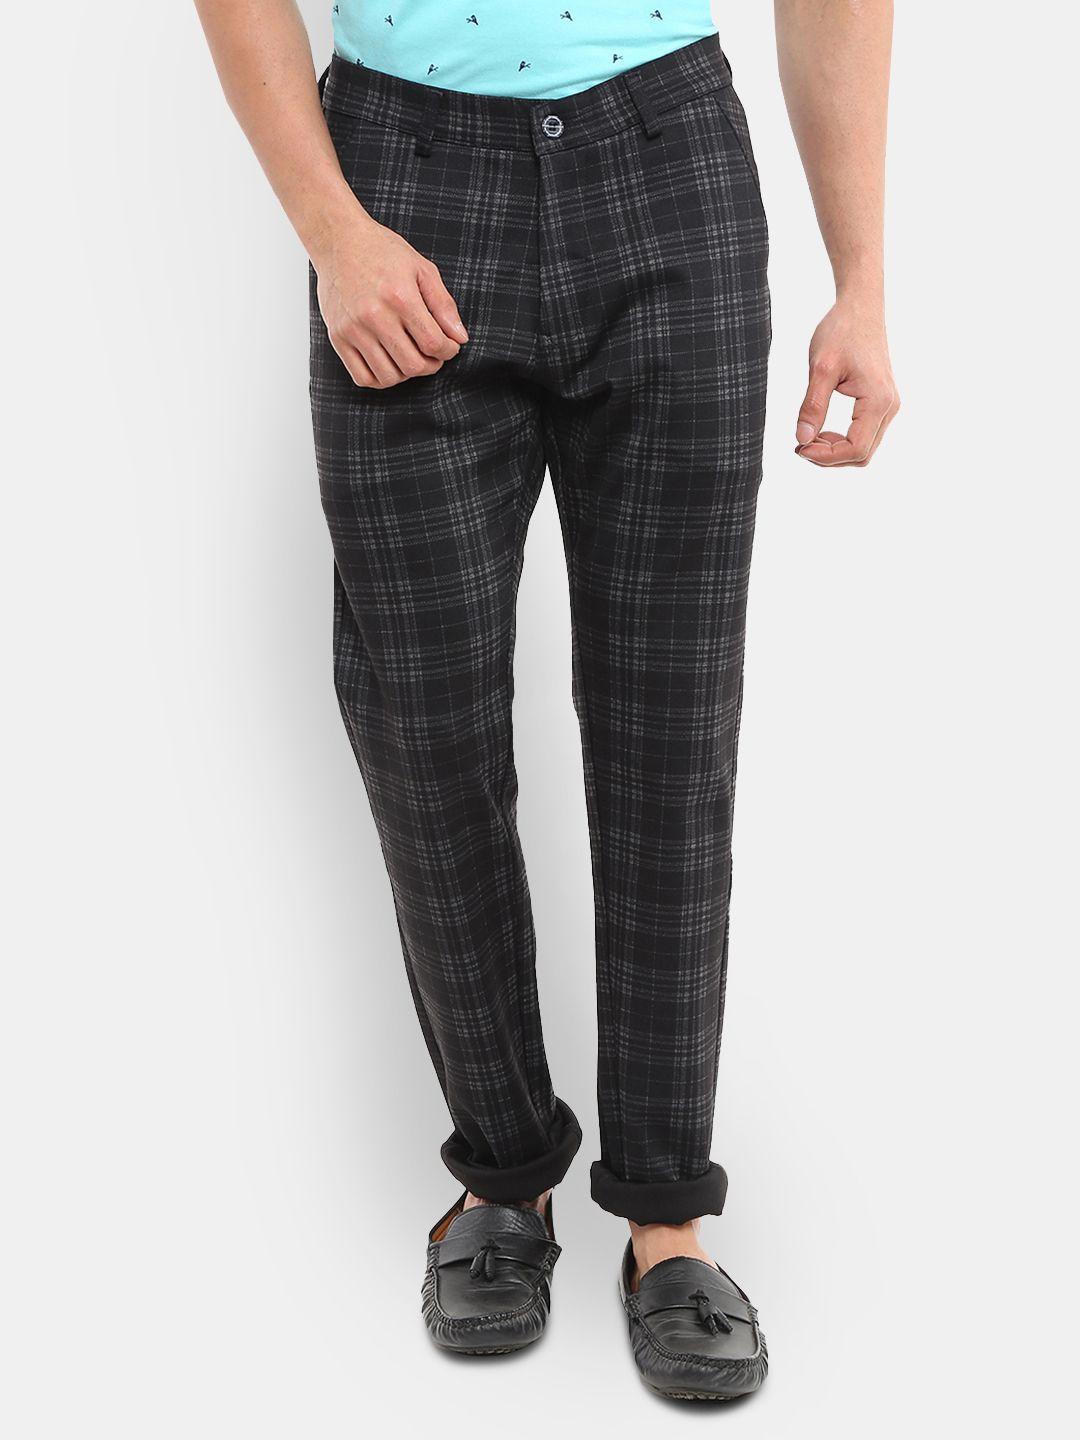 v-mart men black & grey checked classic slim fit easy wash trousers